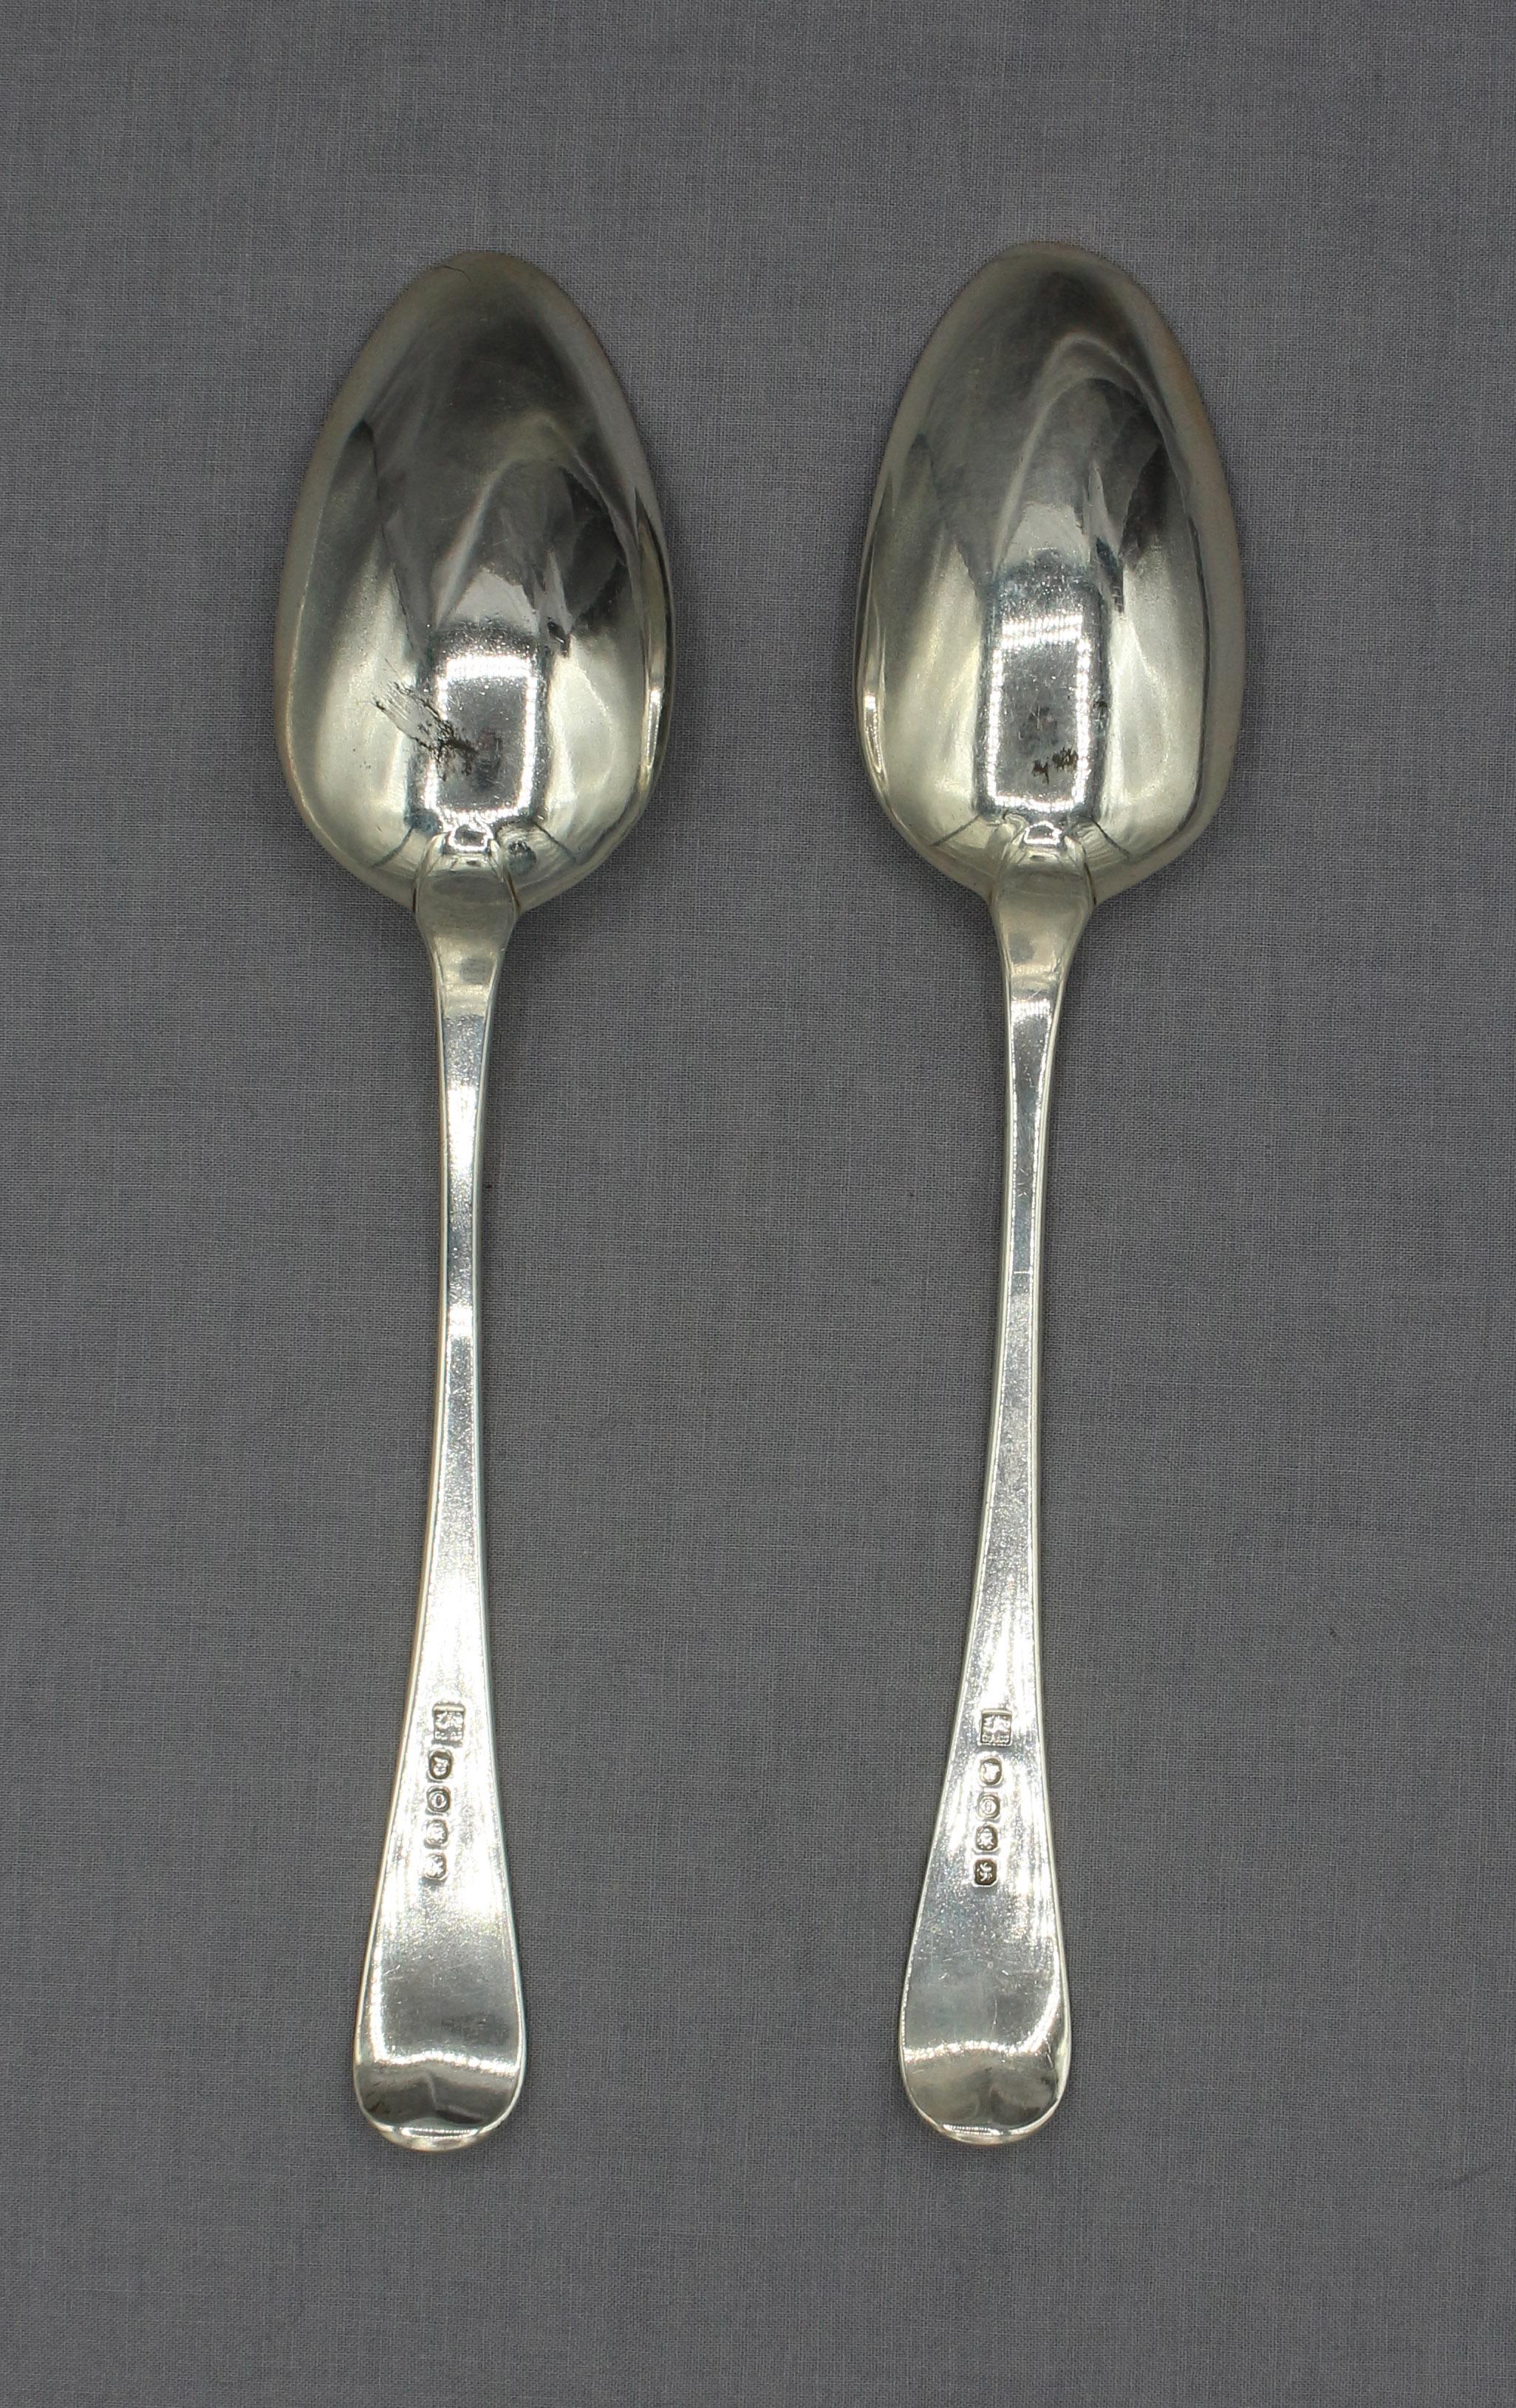 Pair of sterling silver tablespoons by Peter Bateman, London, 1809. Son of Hester Bateman. Possibly once monogrammed. 4.55 troy oz.
9 1/8